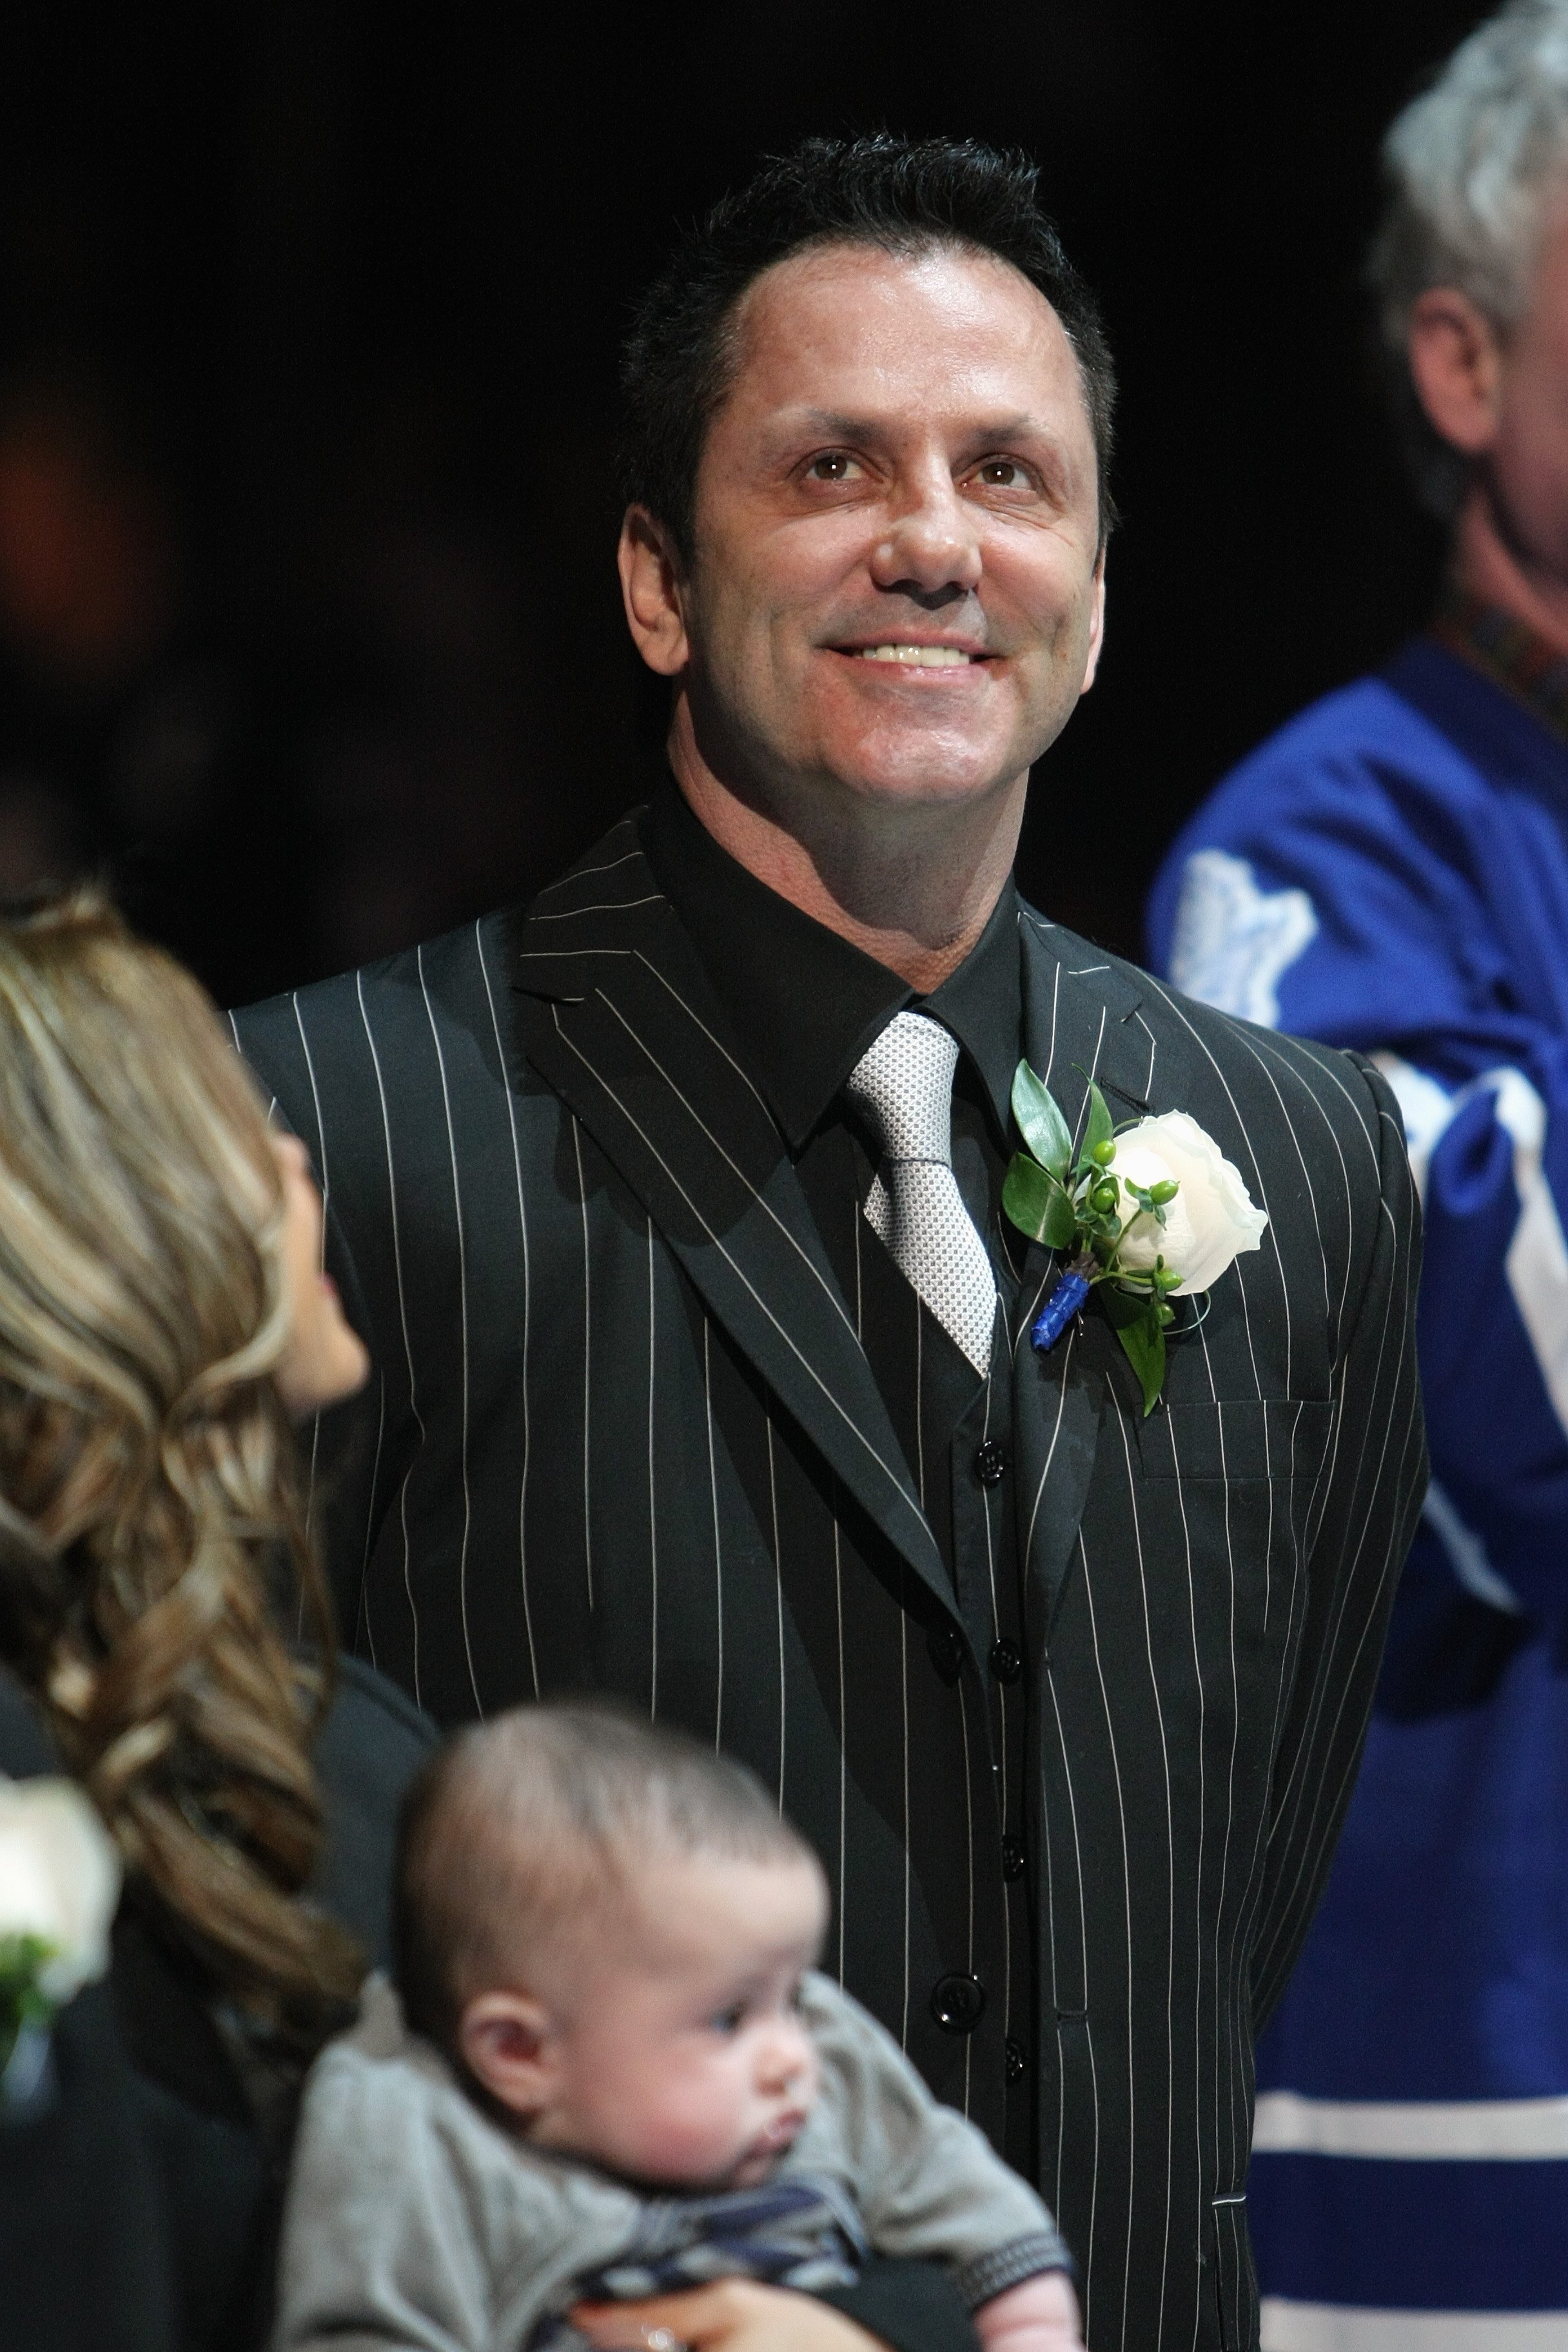 TORONTO - JANUARY 31:  Former Toronto Maple Leafs player Doug Gilmour smiles during a ceremony raising his #93 jersey to the rafters before the game against the Pittsburgh Penguins at Air Canada Centre on January 31, 2009 in Toronto, Ontario, Canada. (Pho